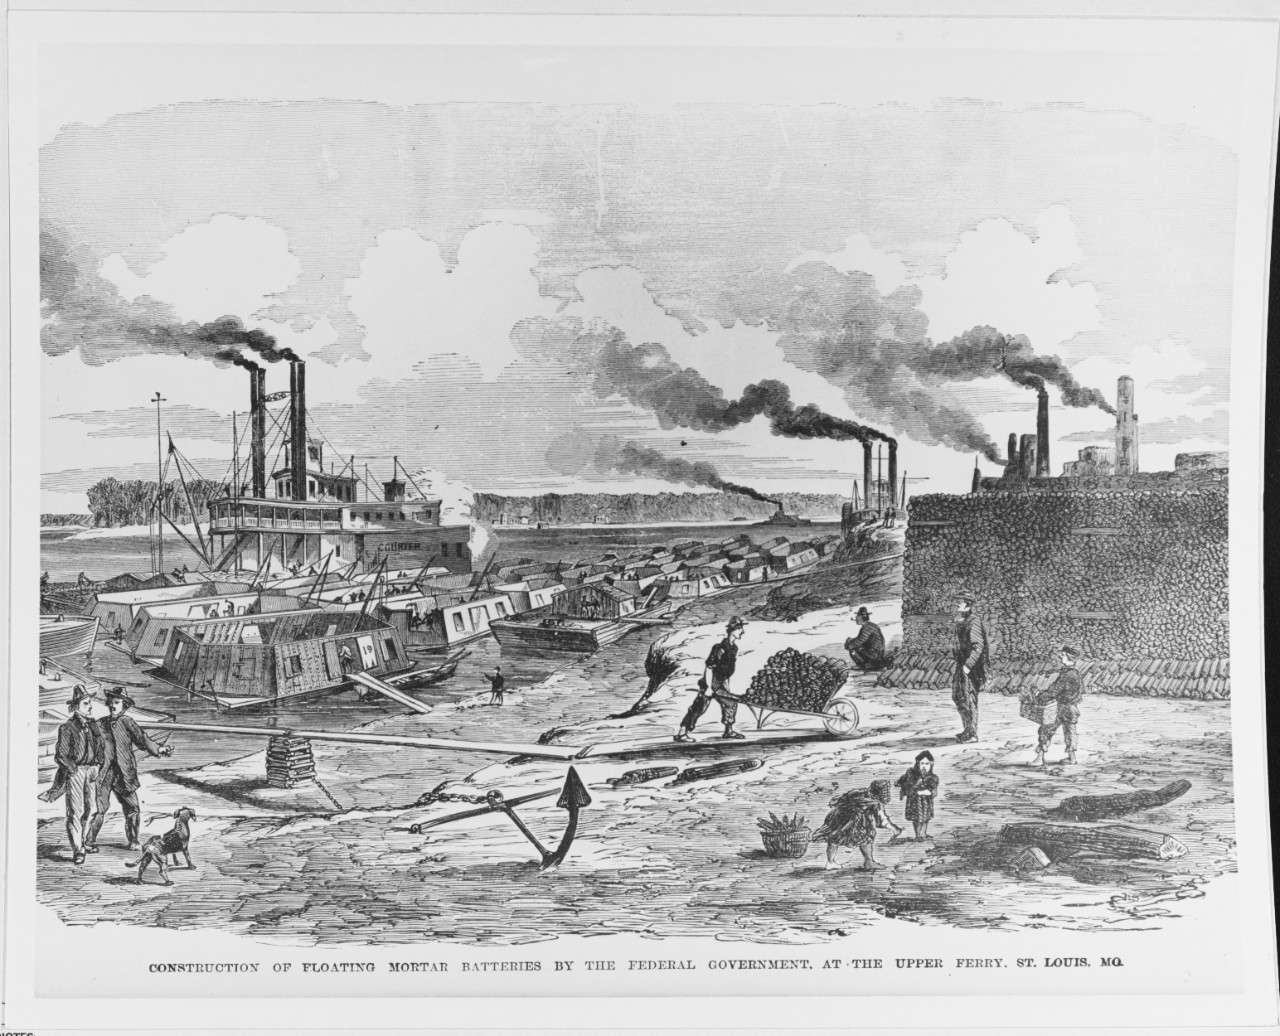 Construction of Mortar Boats by the Federal Government in late 1861